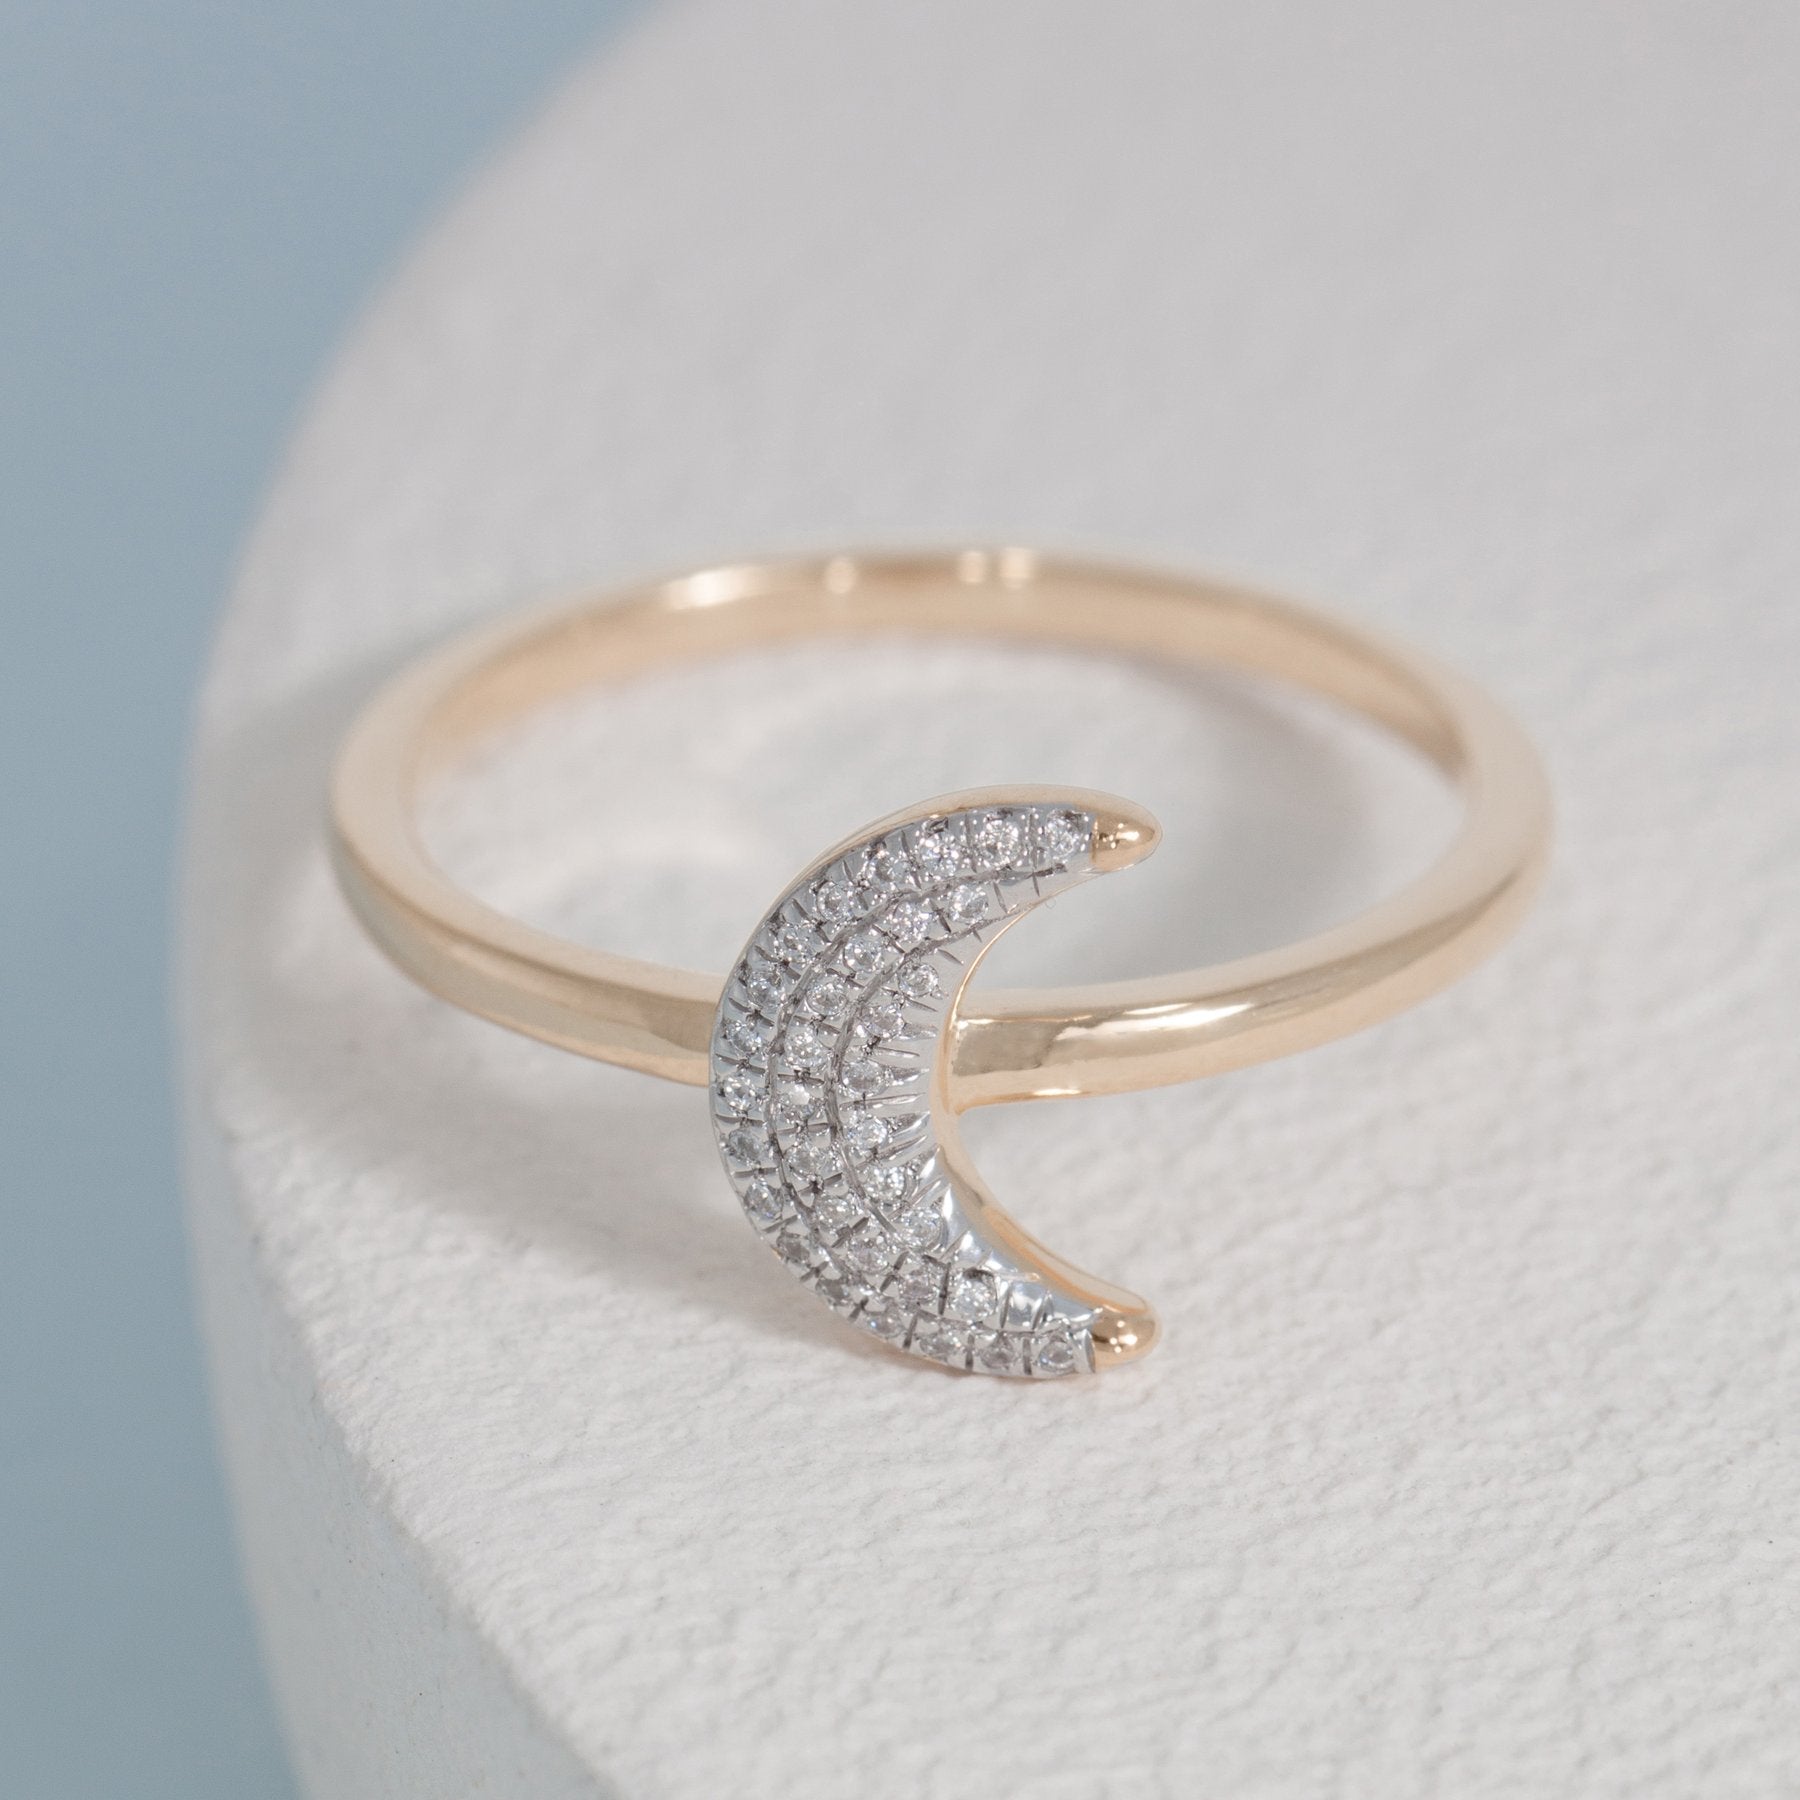 Mooning Over You diamond and gold over sterling by Ella Stein – Shop